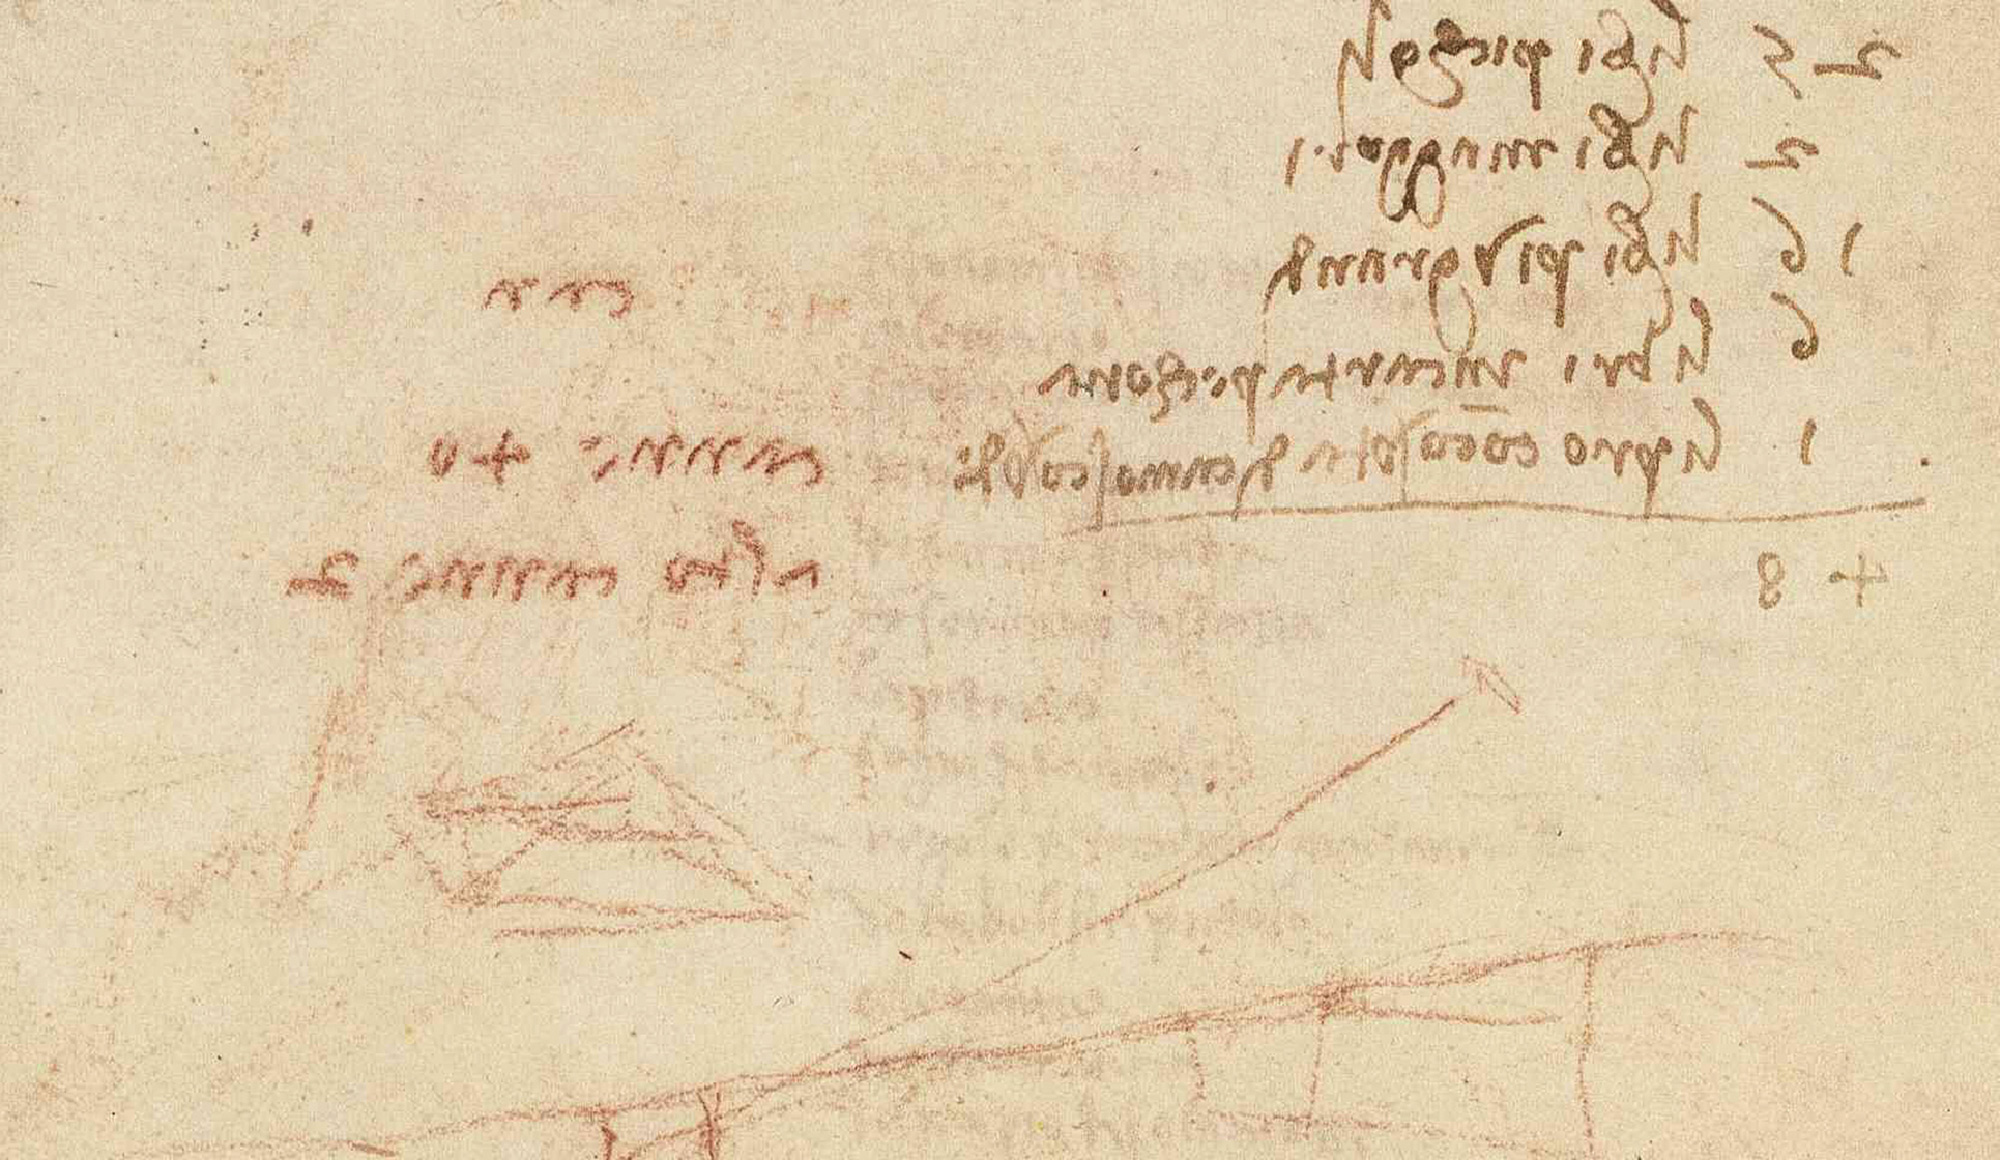 A page from the “Codex Madrid II” (folio 3v) on which Leonardo lists fifty volumes (“25 small books; 2 larger books; 16 rather larger books; 6 books on vellum; 1 book bound in green chamois”) but adds them incorrectly to arrive at a total of forty-eight. These volumes are not considered to be part of his library; many scholars speculate that they are his own notebooks and collections of drawings.